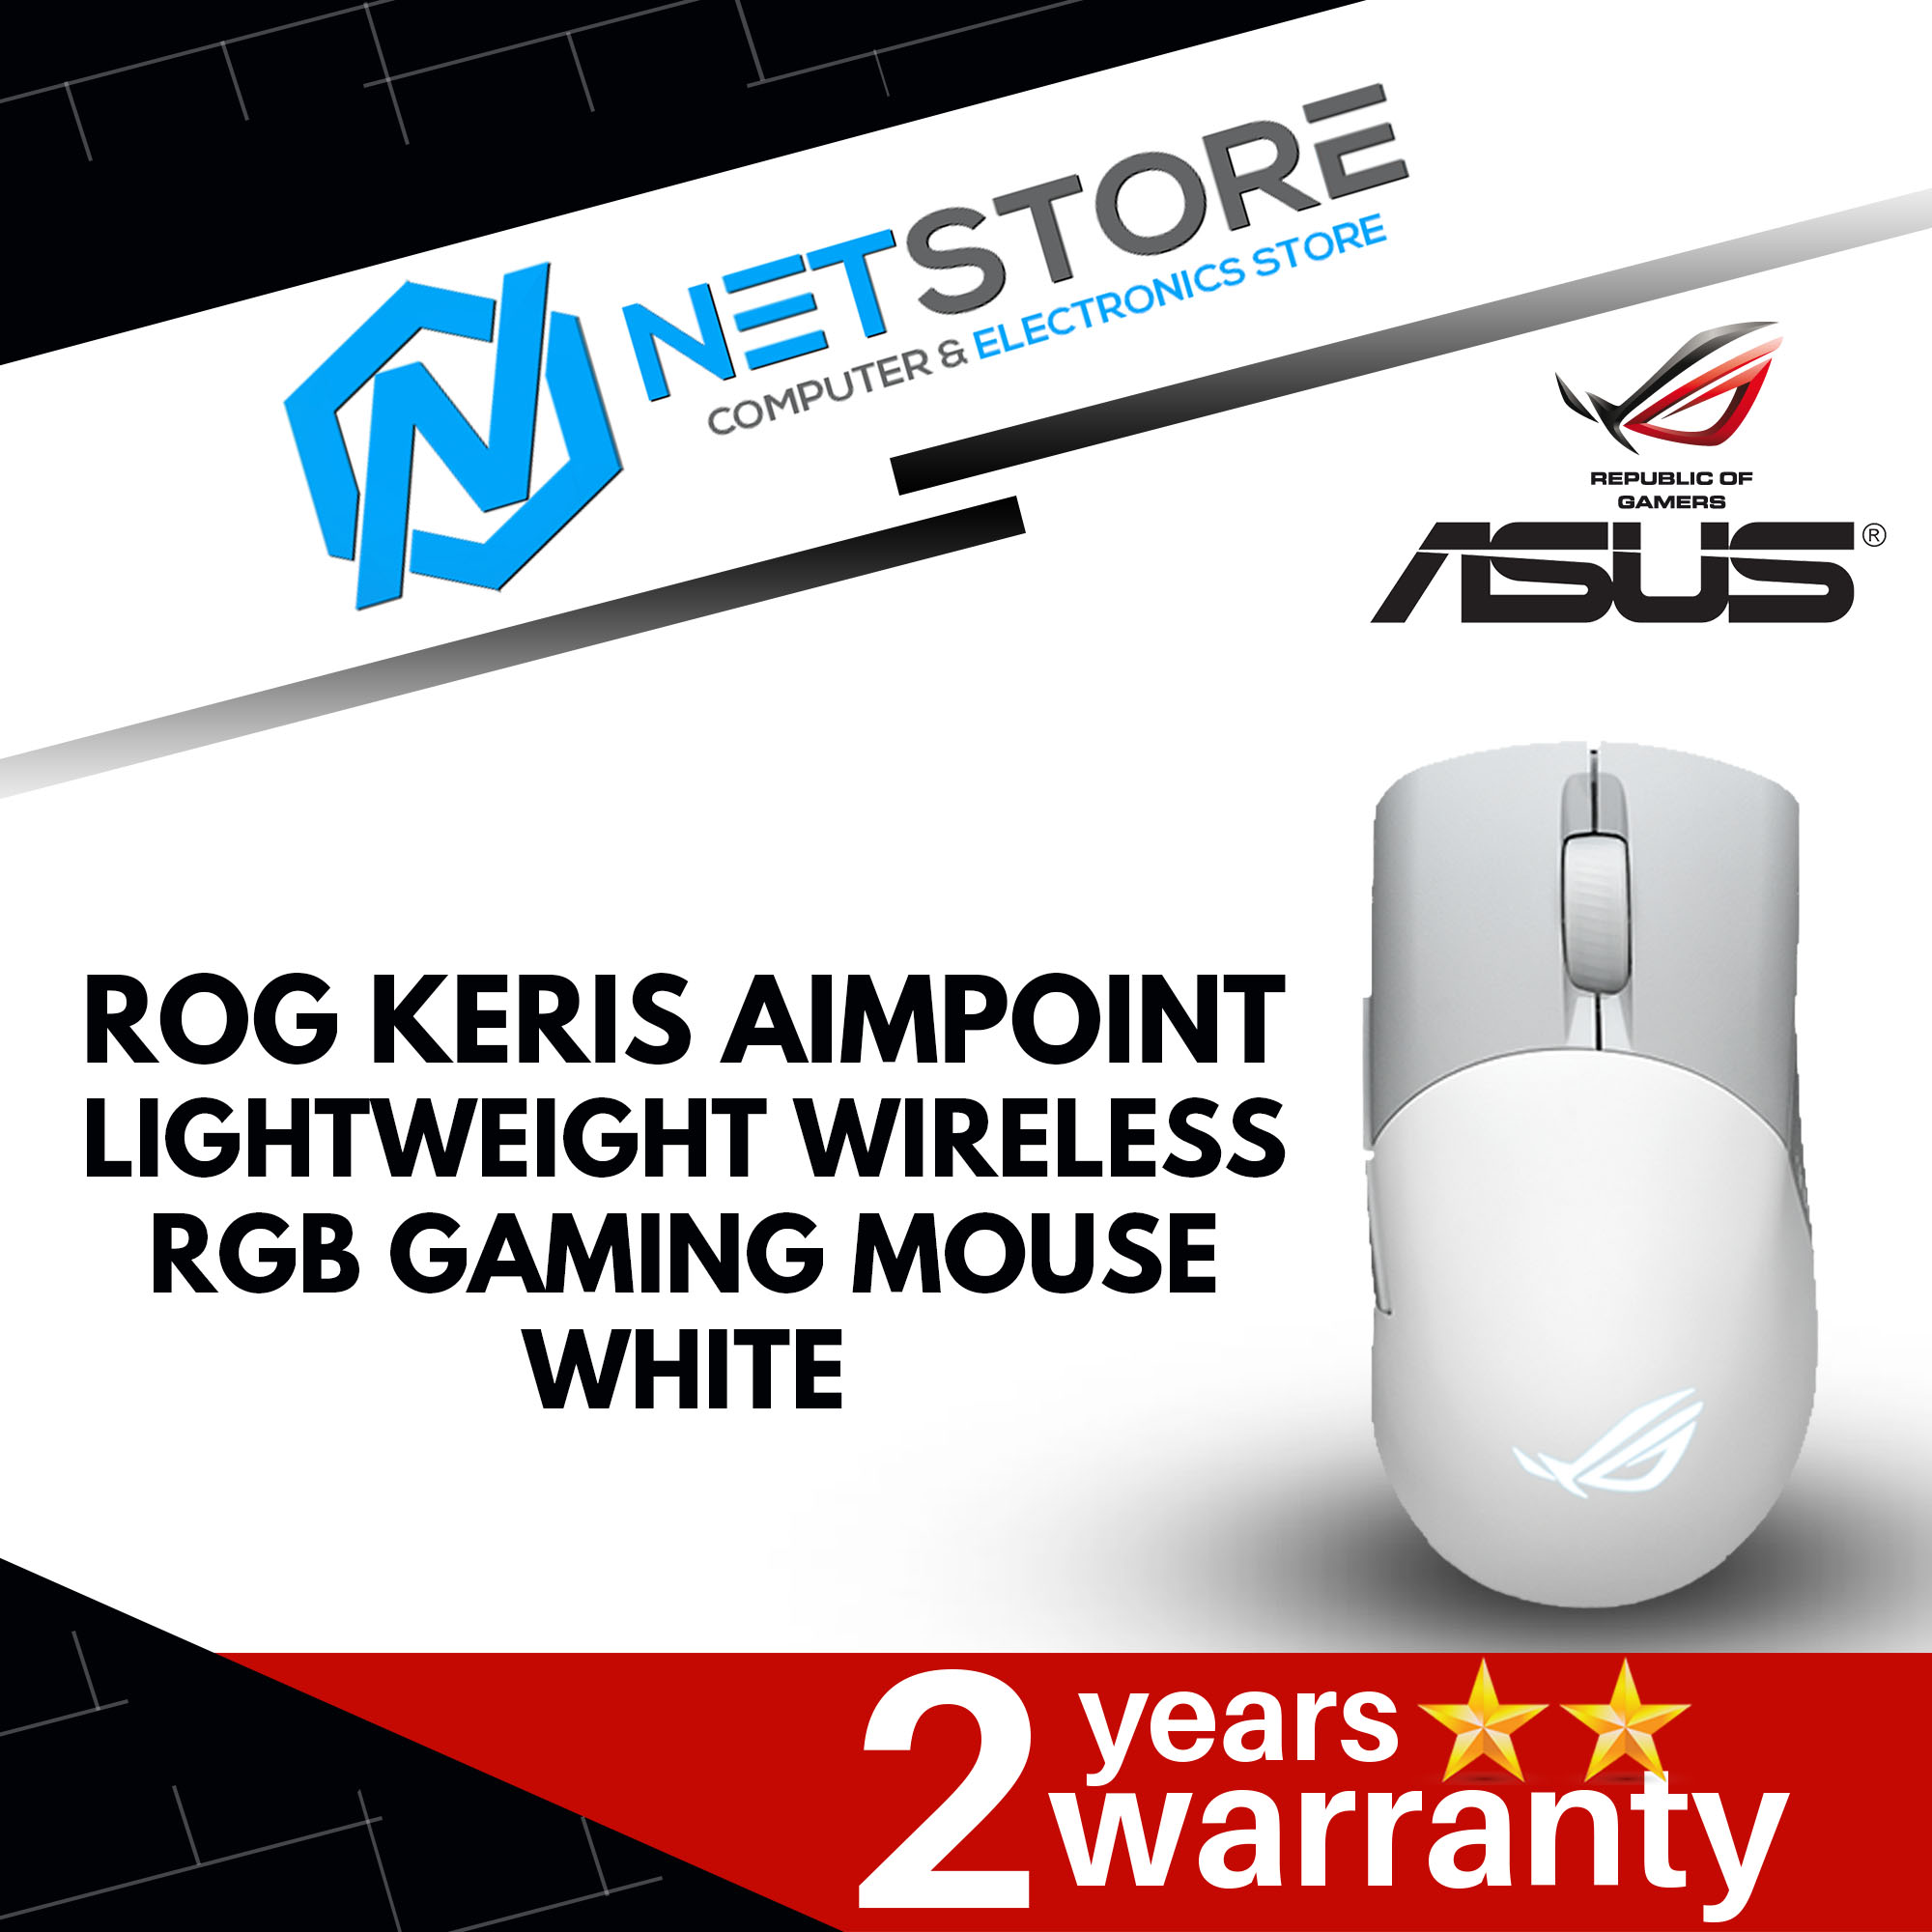 ASUS P709 ROG KERIS AIMPOINT WIRELESS RGB GAMING MOUSE WHITE